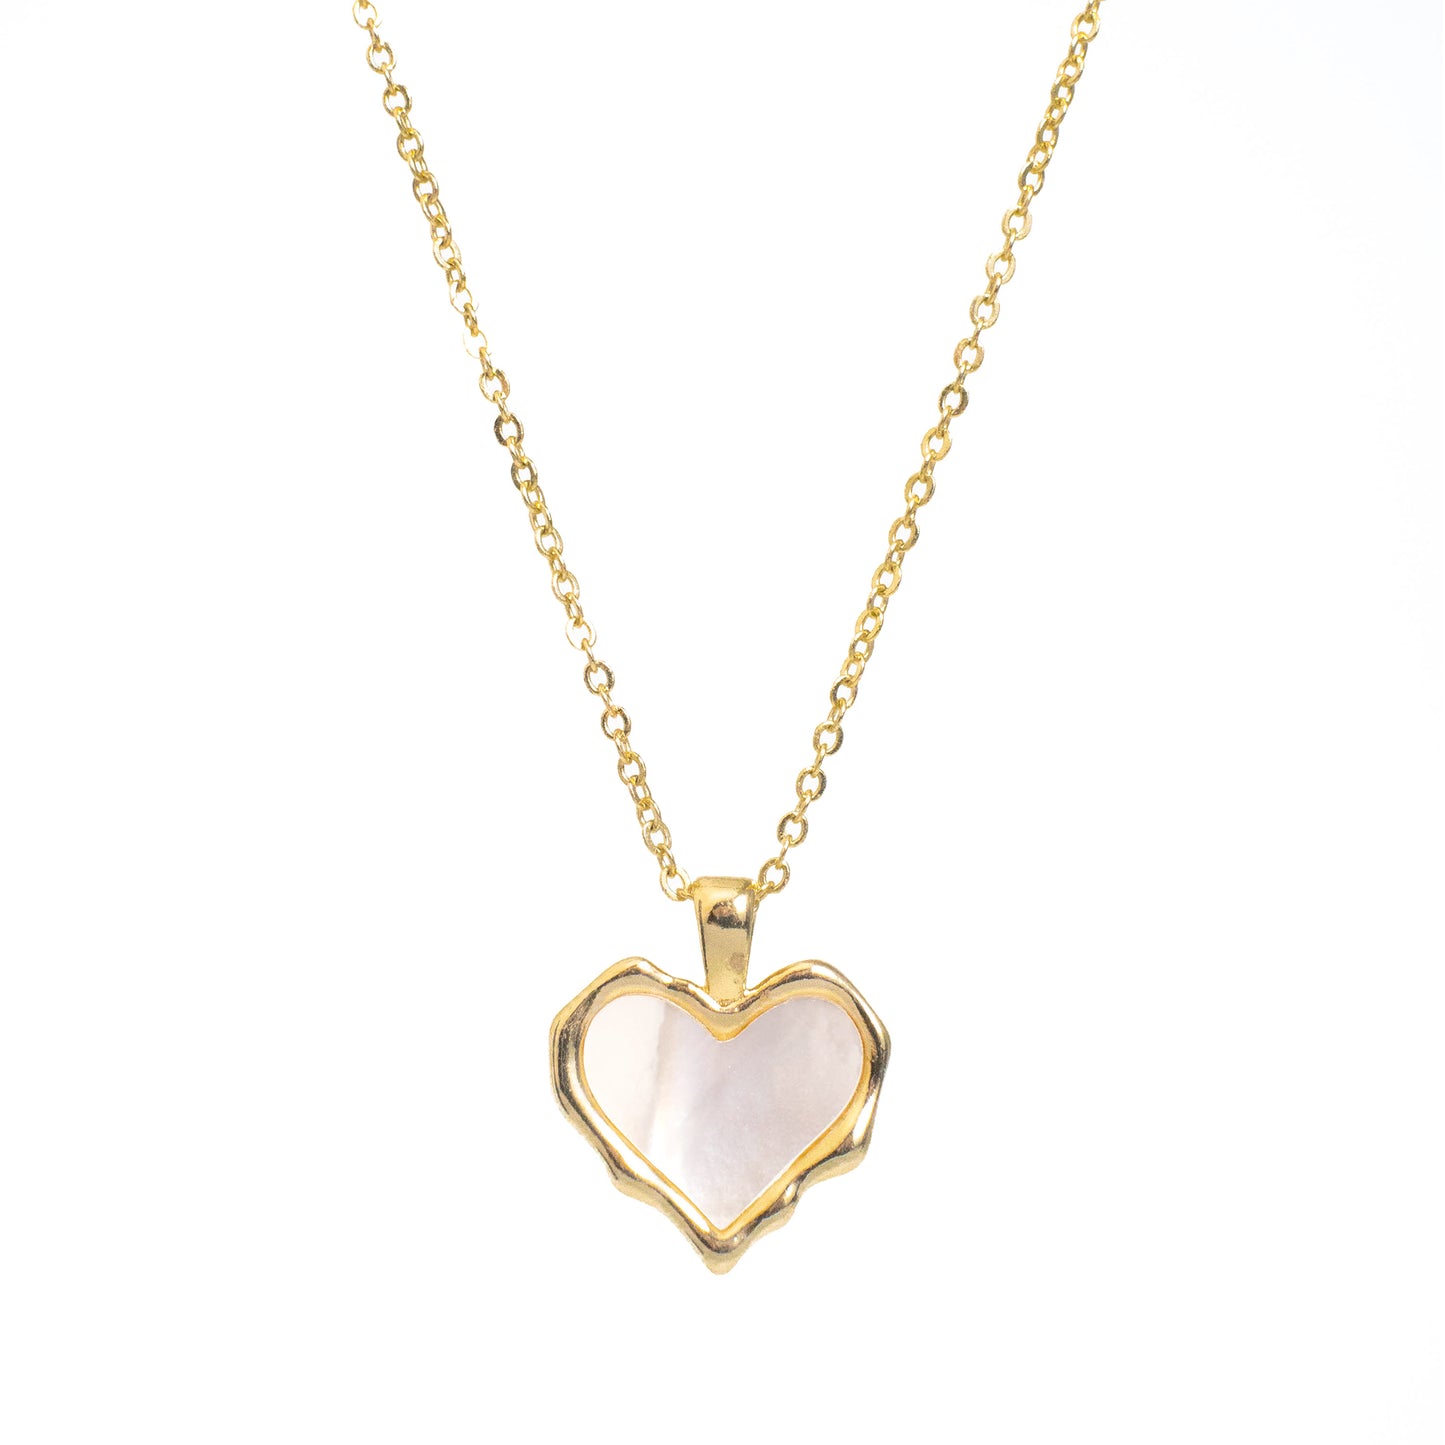 Heart mother-of-pearl Necklace